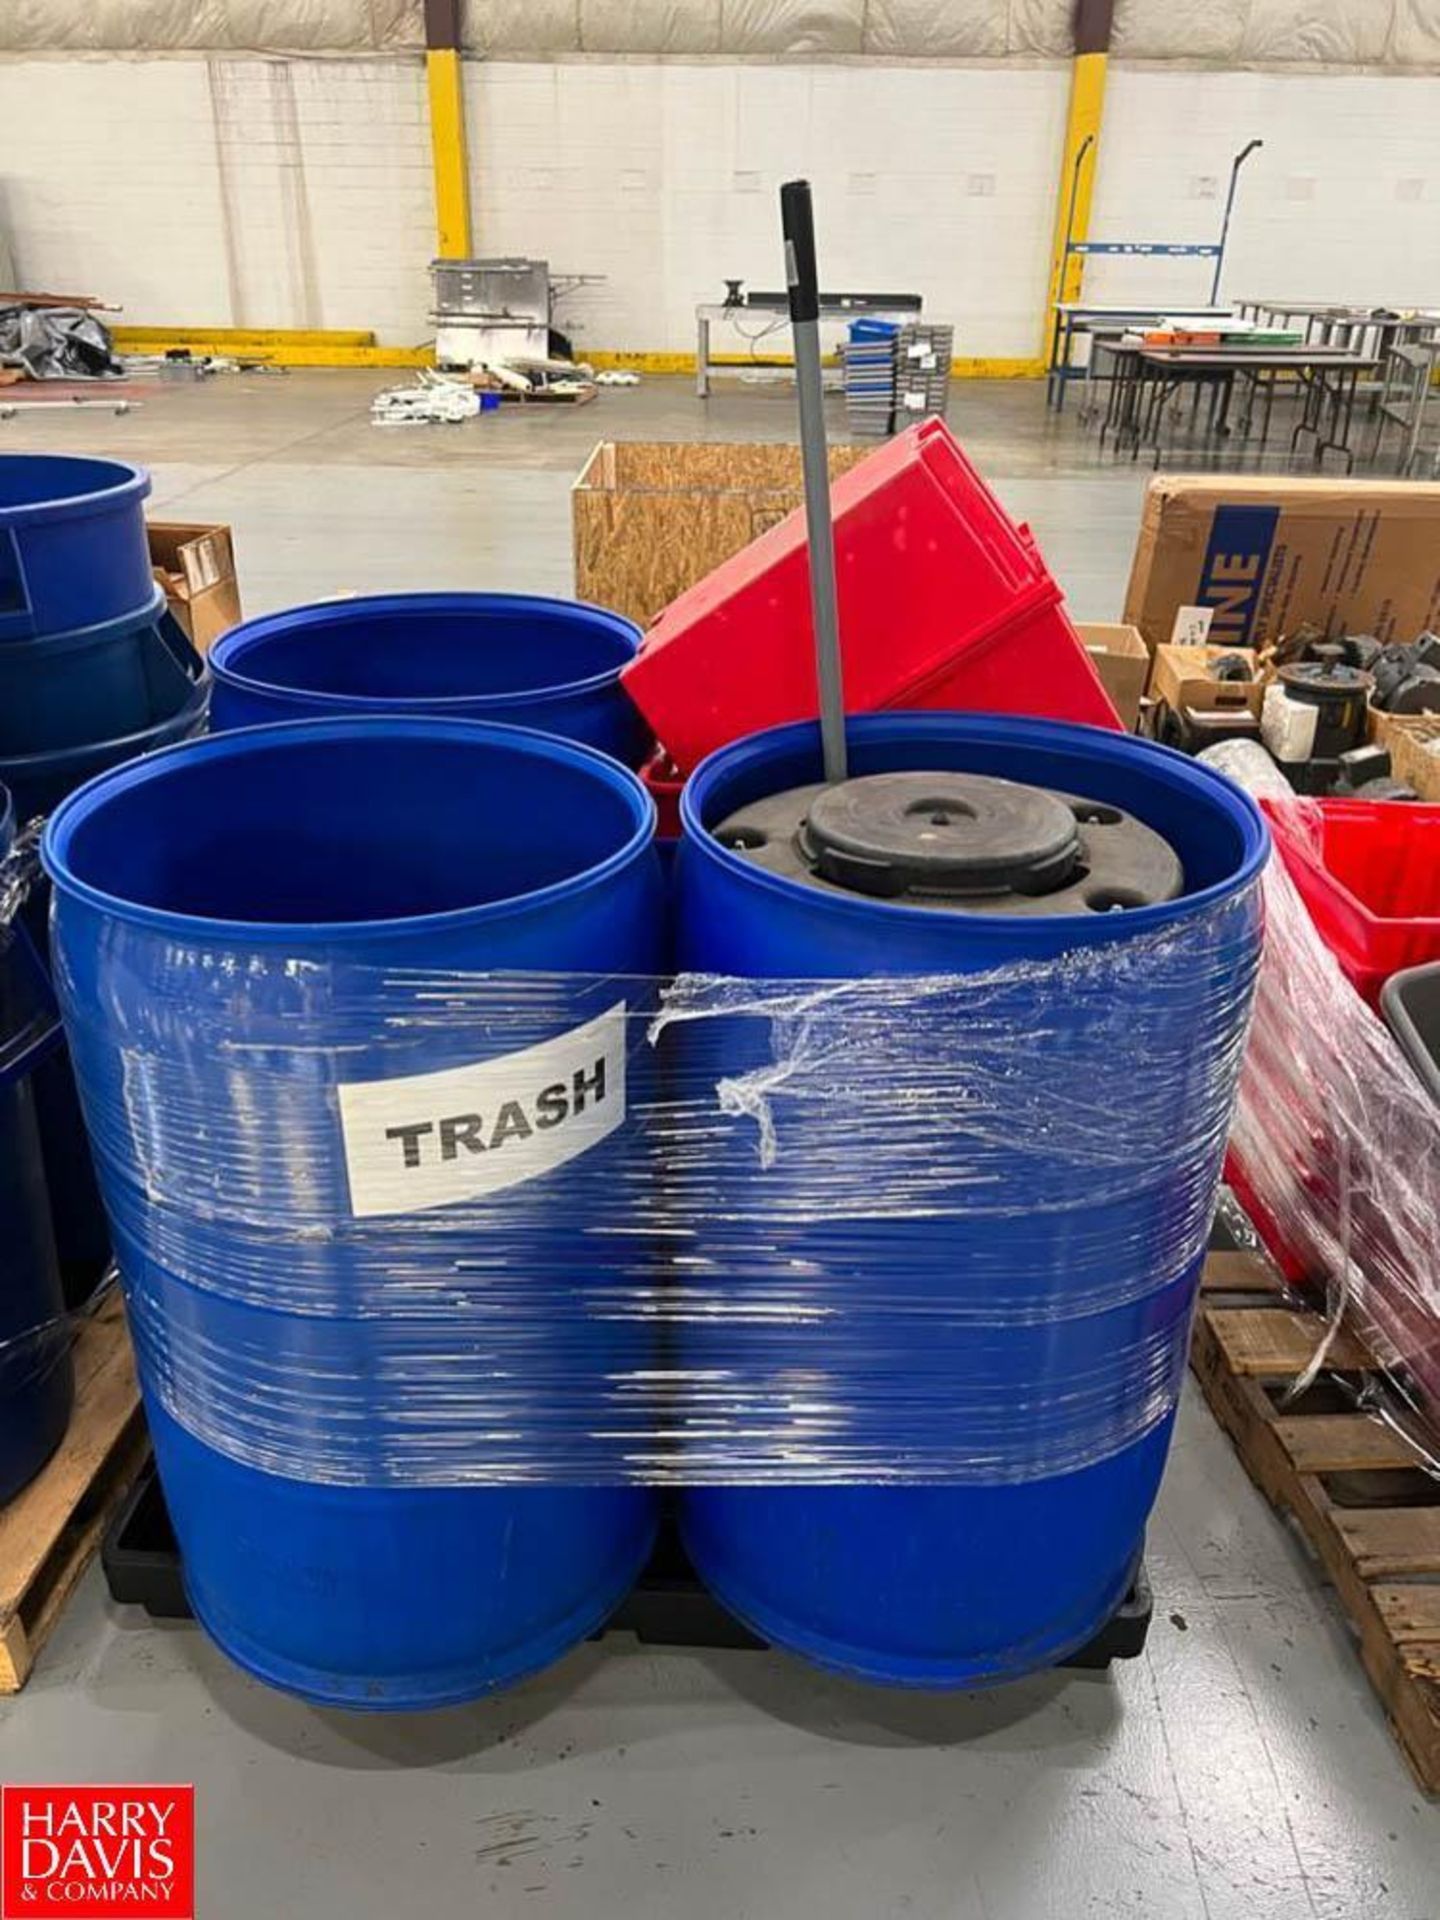 Assorted Trash Cans, Mops and Buckets, Brooms, Dust Pans, 5 Gallon Buckets, Recycling and Storage Bi - Image 3 of 15